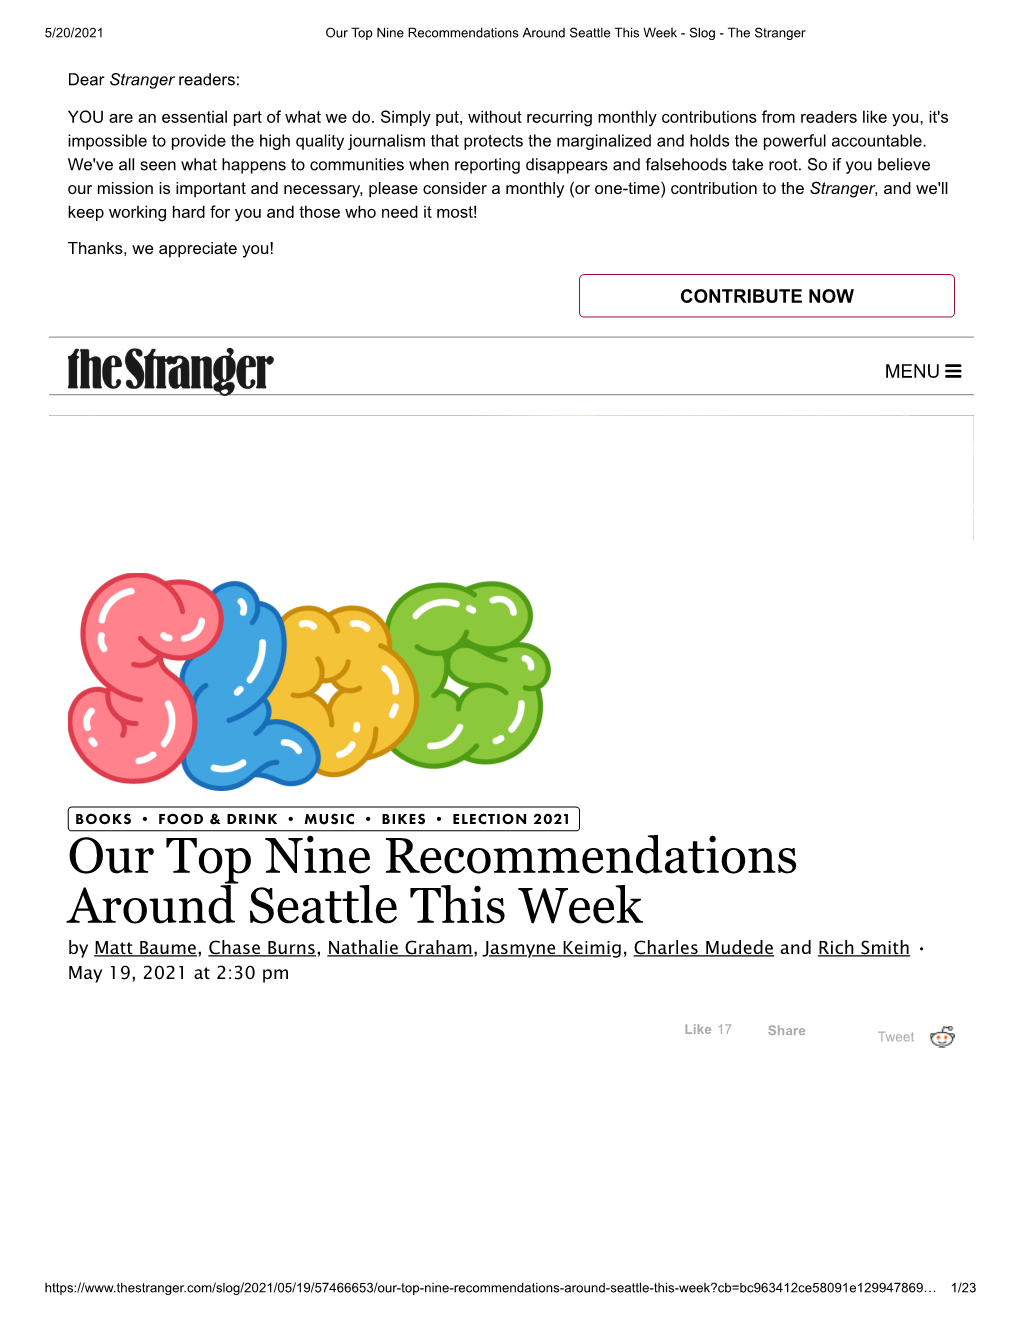 Our Top Nine Recommendations Around Seattle This Week - Slog - the Stranger